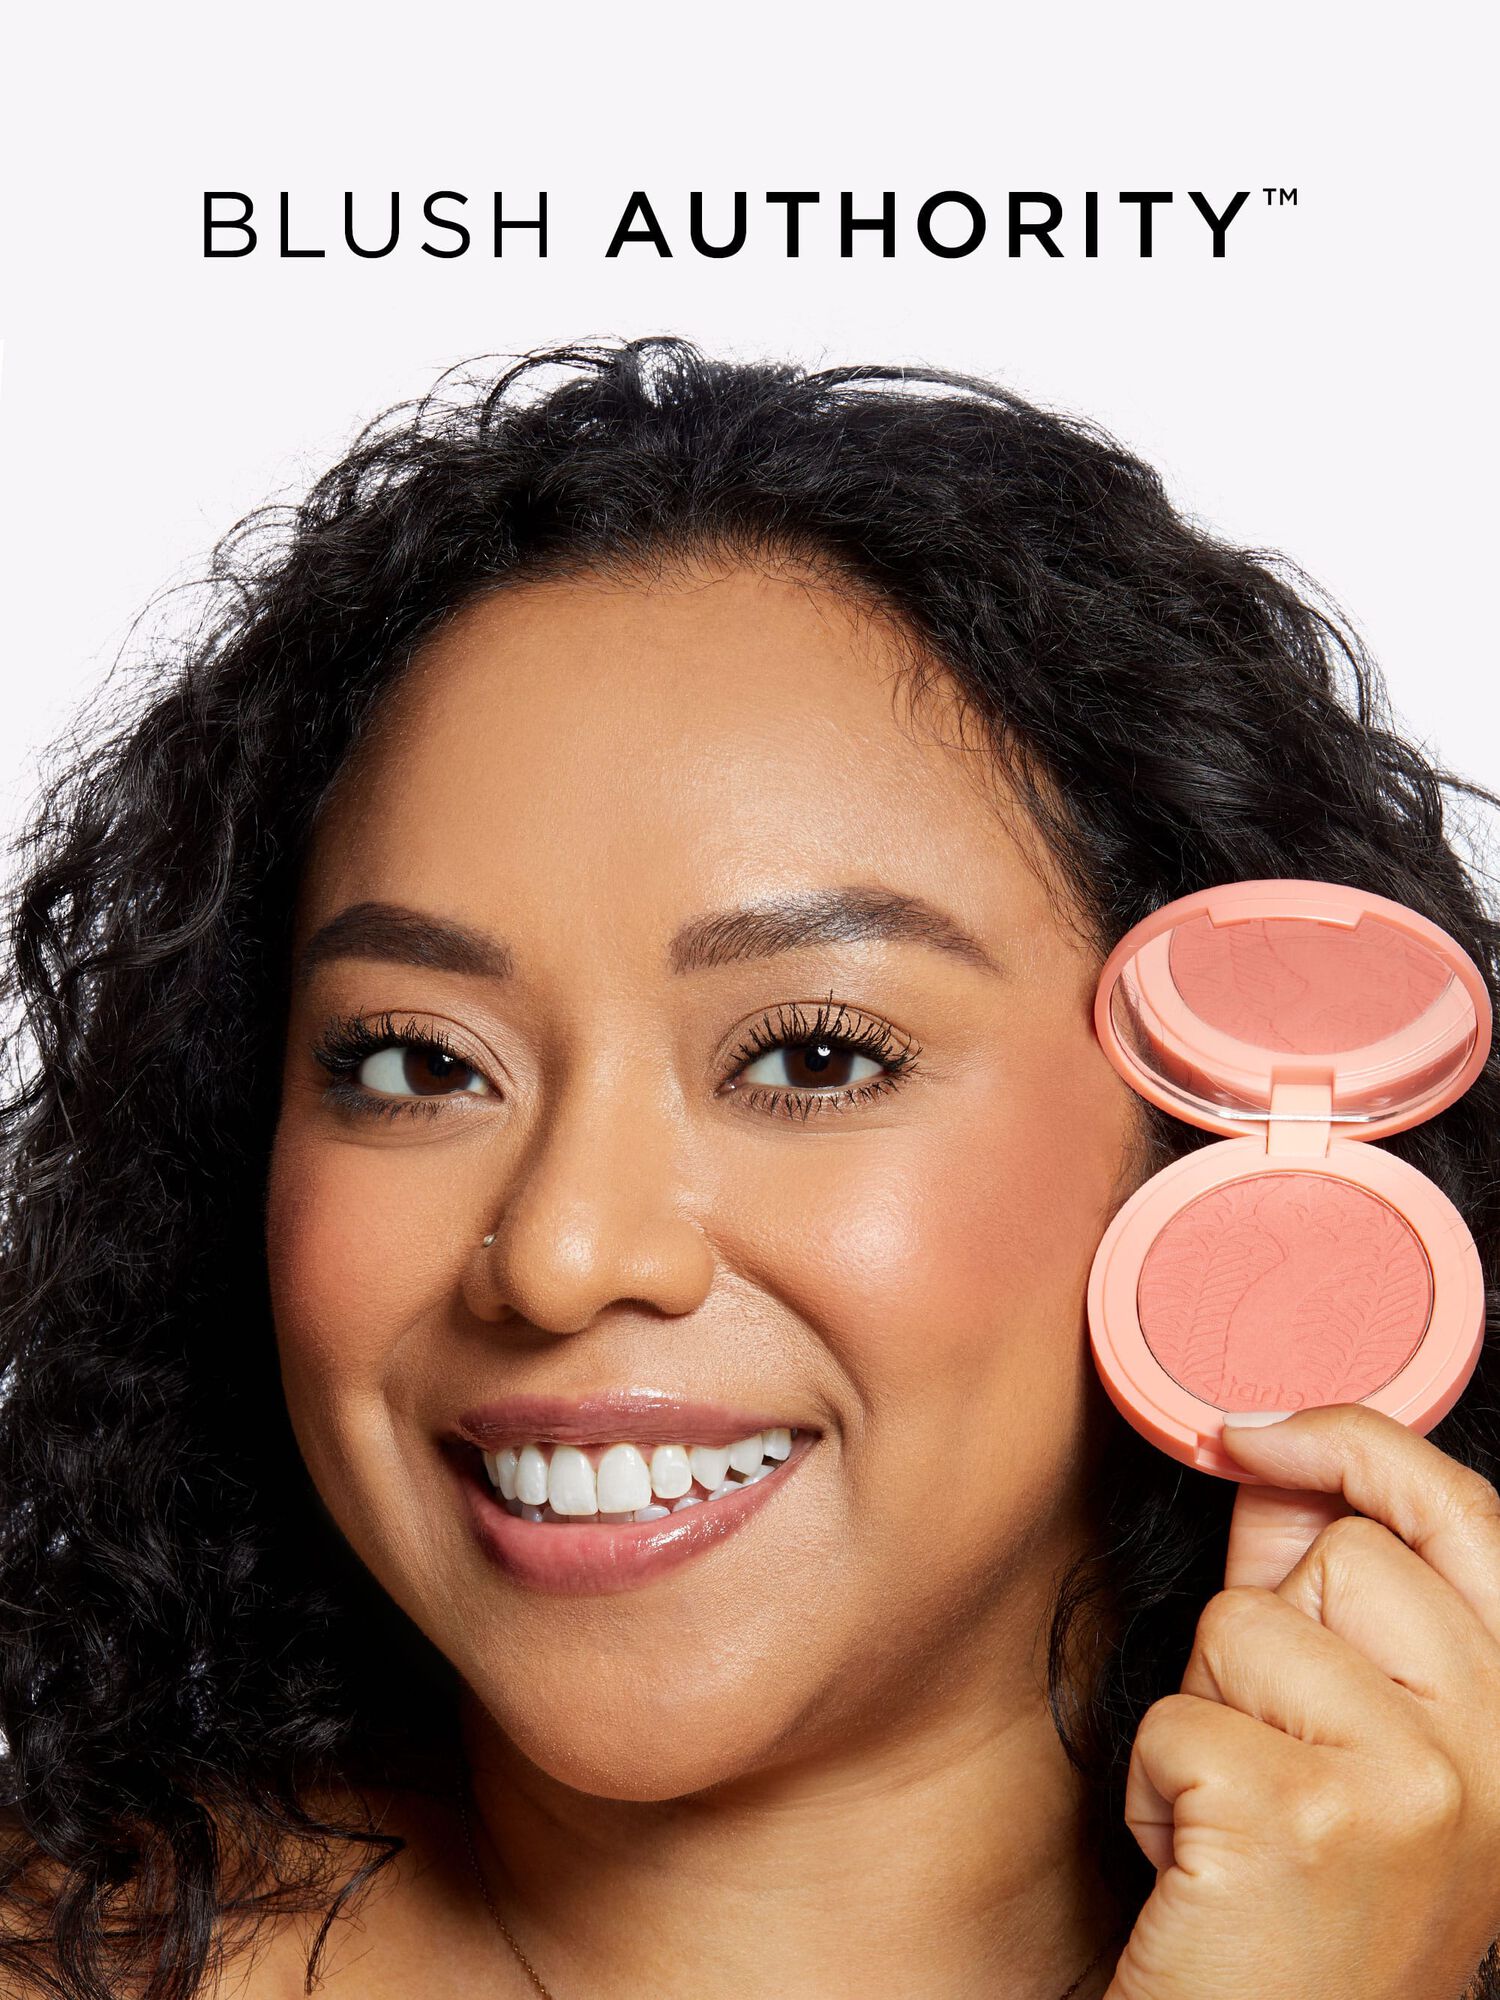 Amazonian clay 12-hour blush image number null